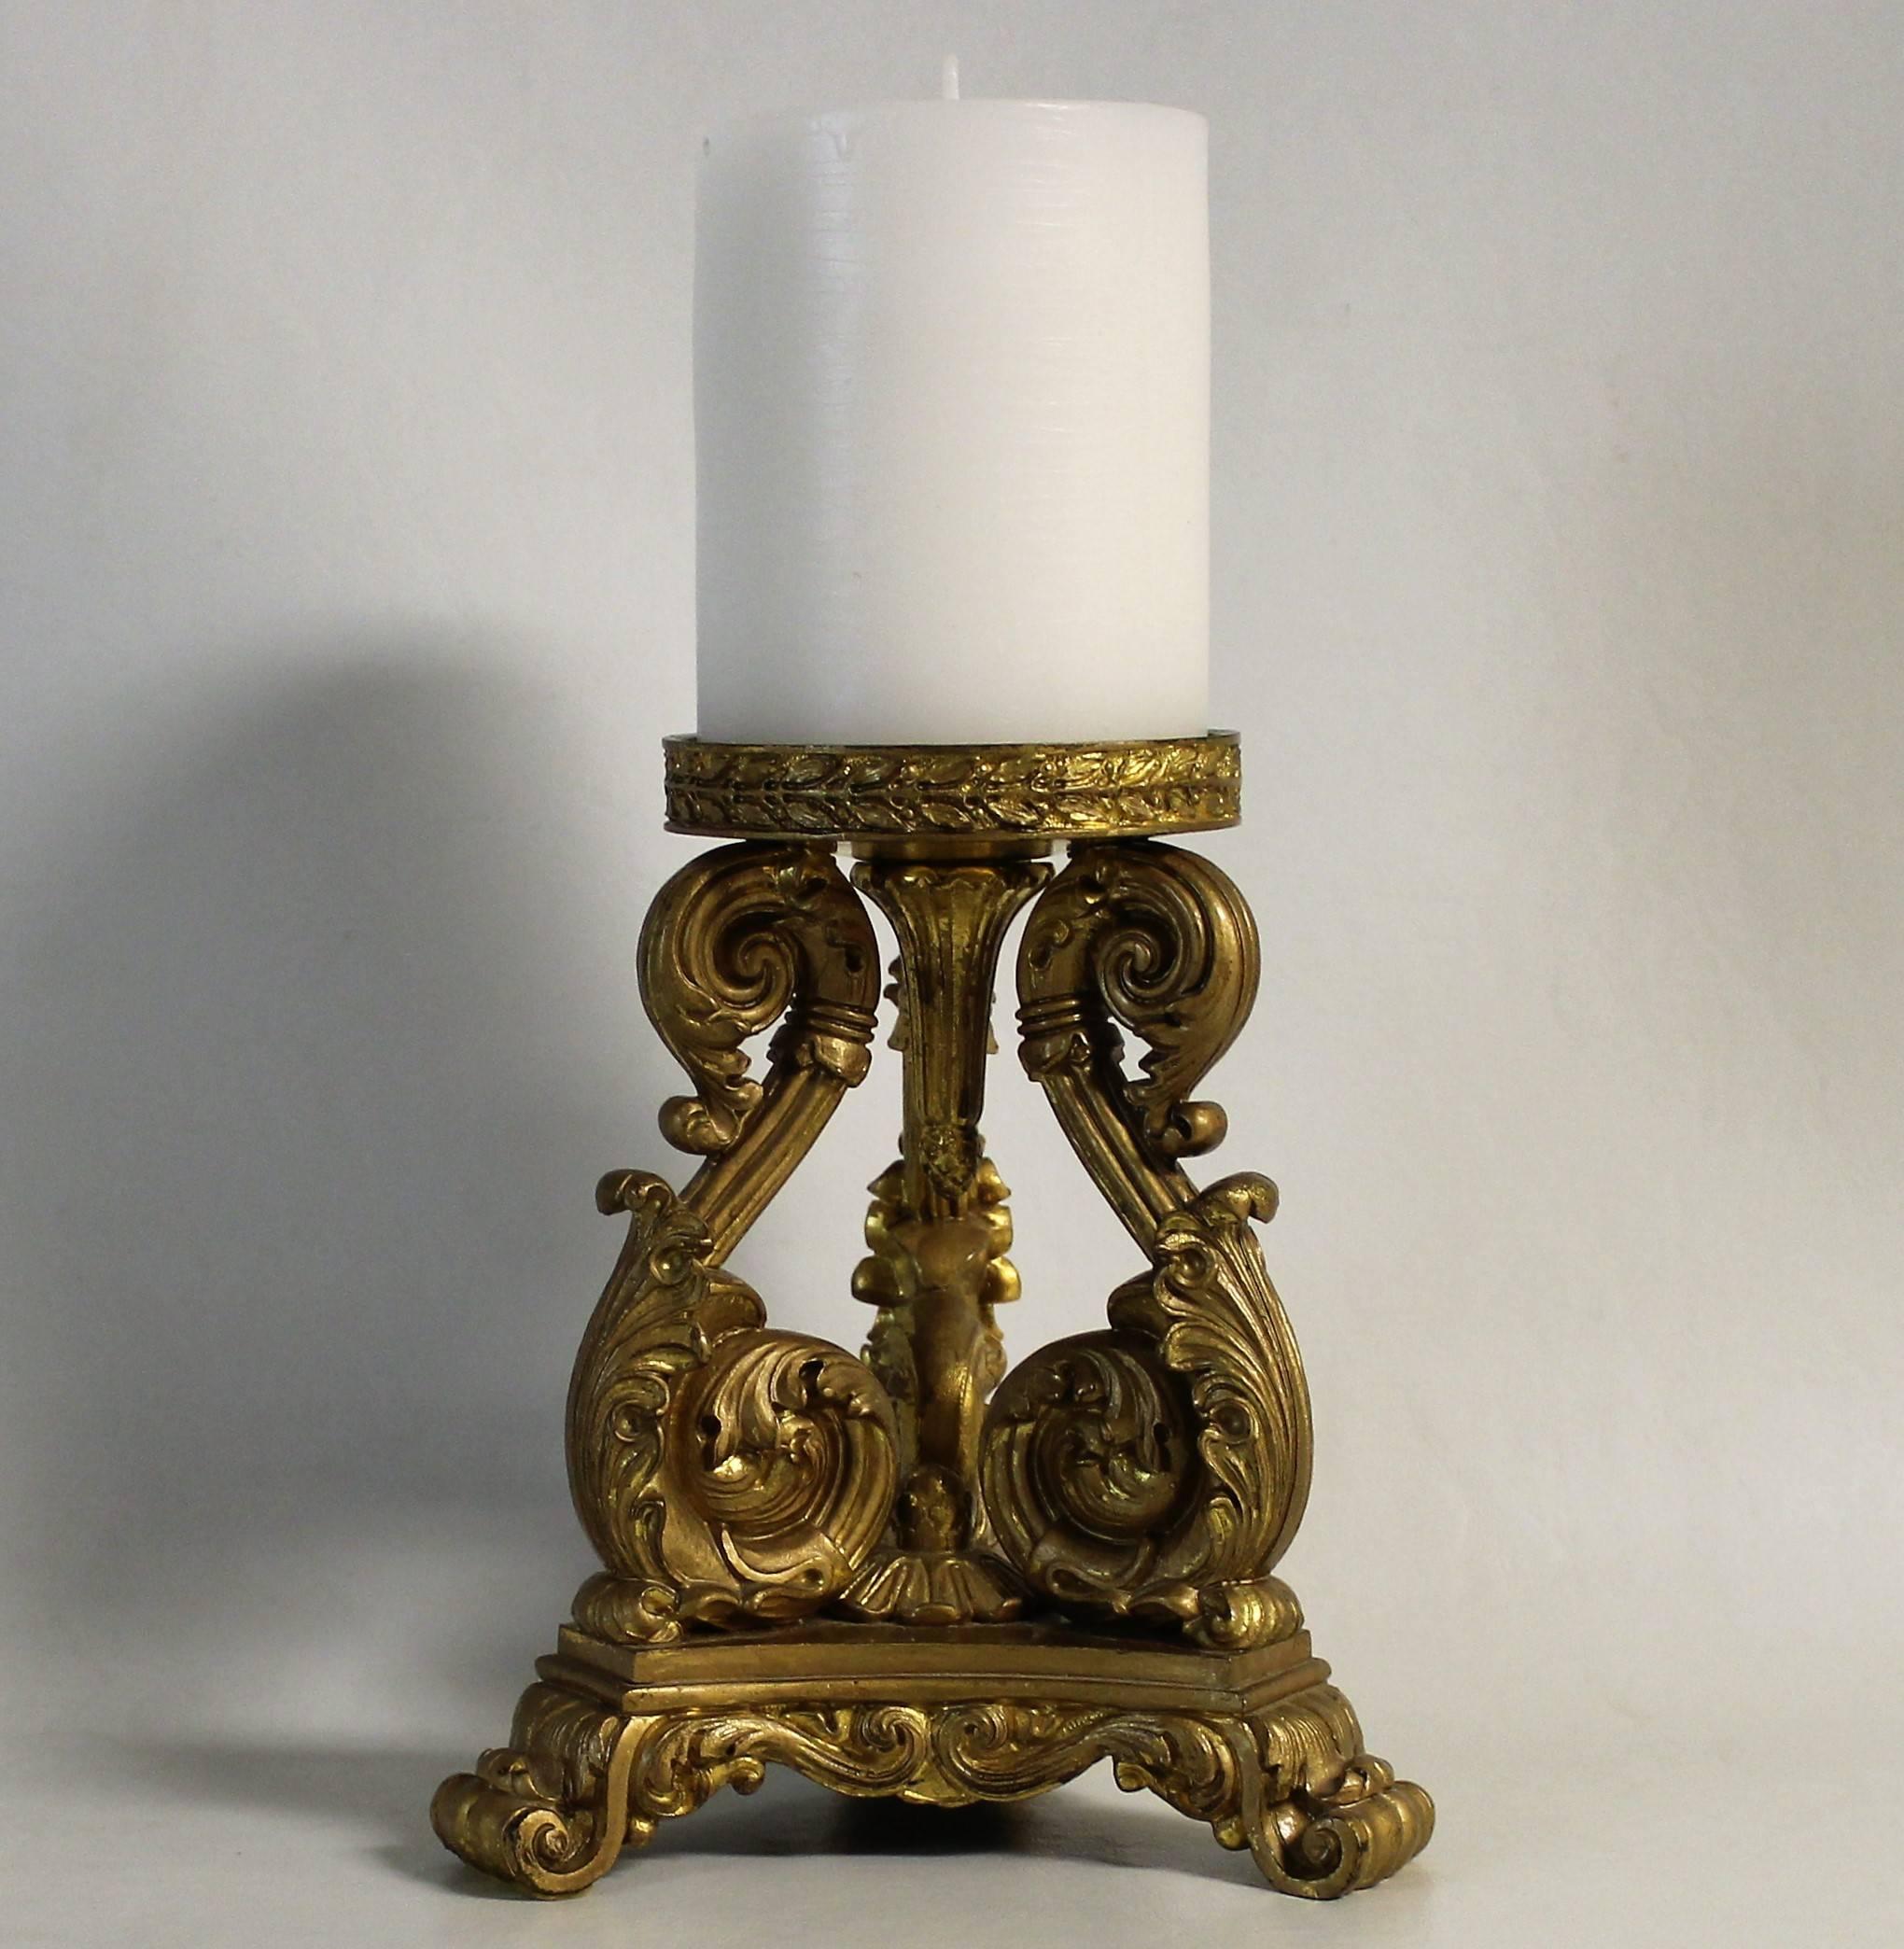 Pair of 19th century French gilt bronze candle holders.